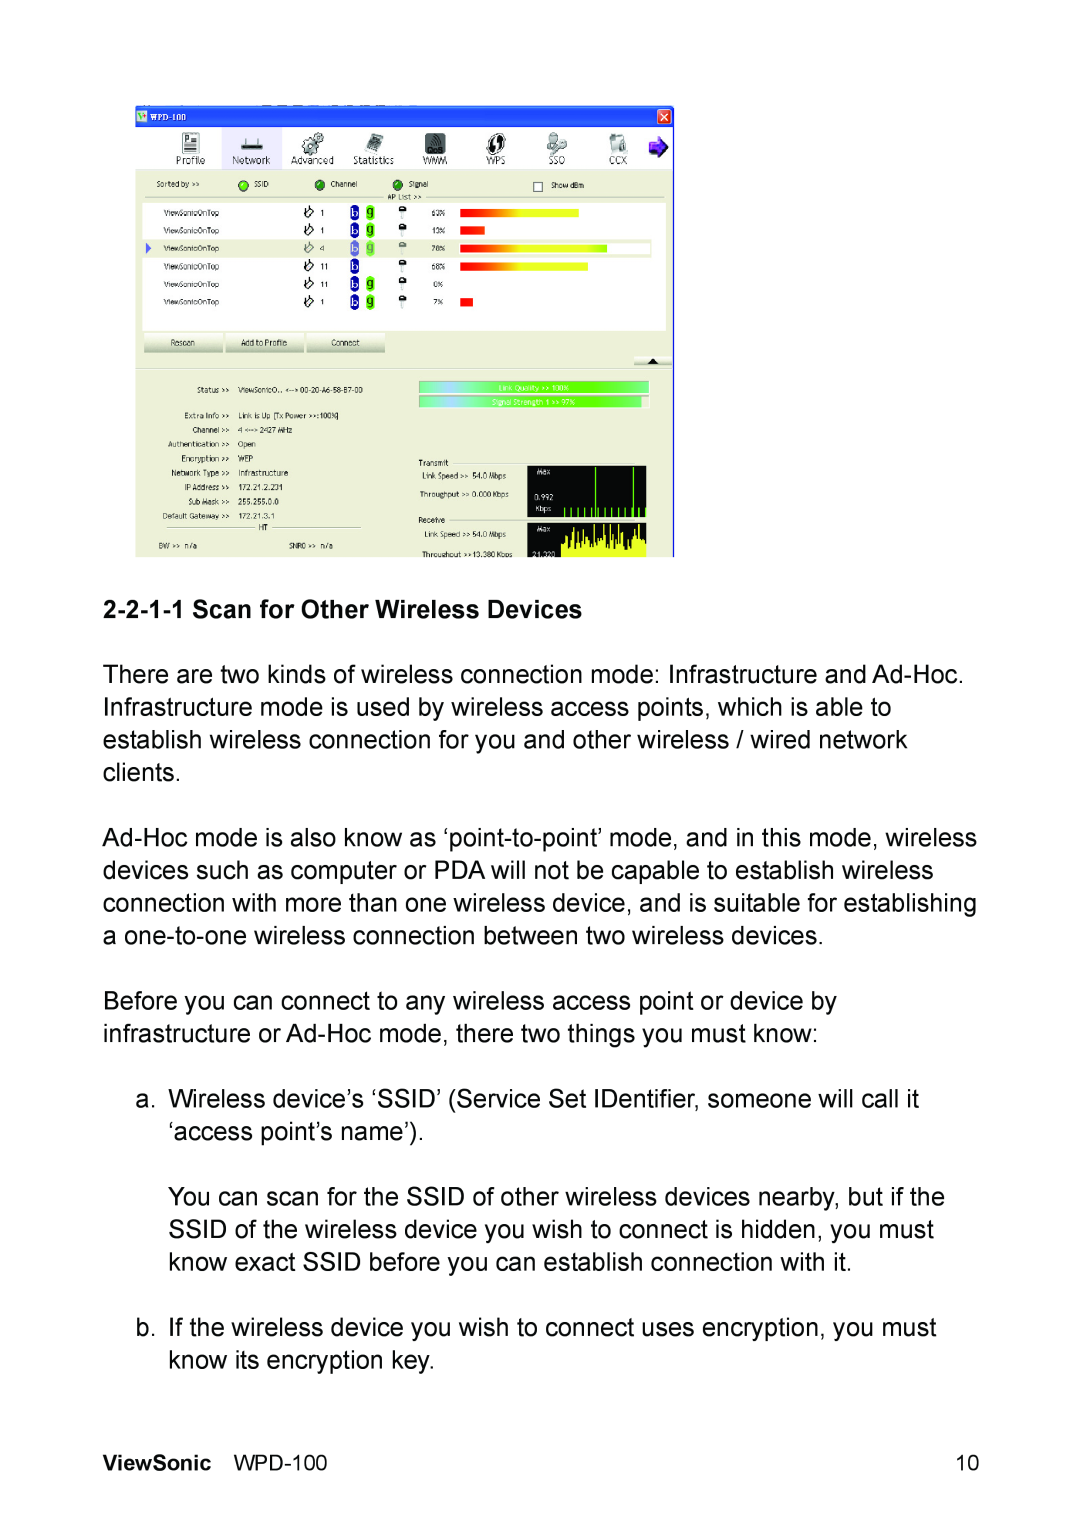 ViewSonic VS13789 manual 2-2-1-1Scan for Other Wireless Devices 